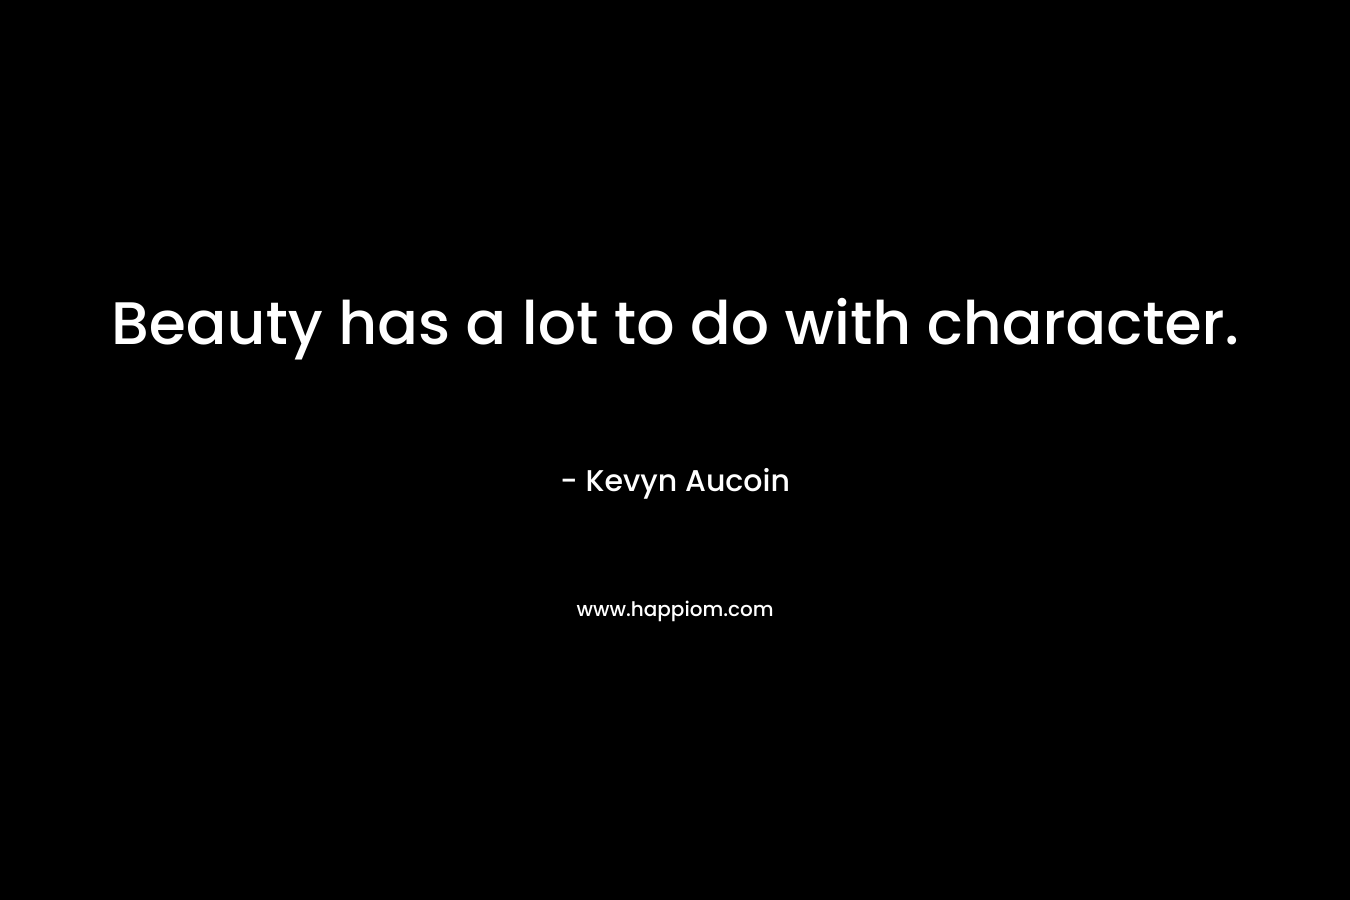 Beauty has a lot to do with character.